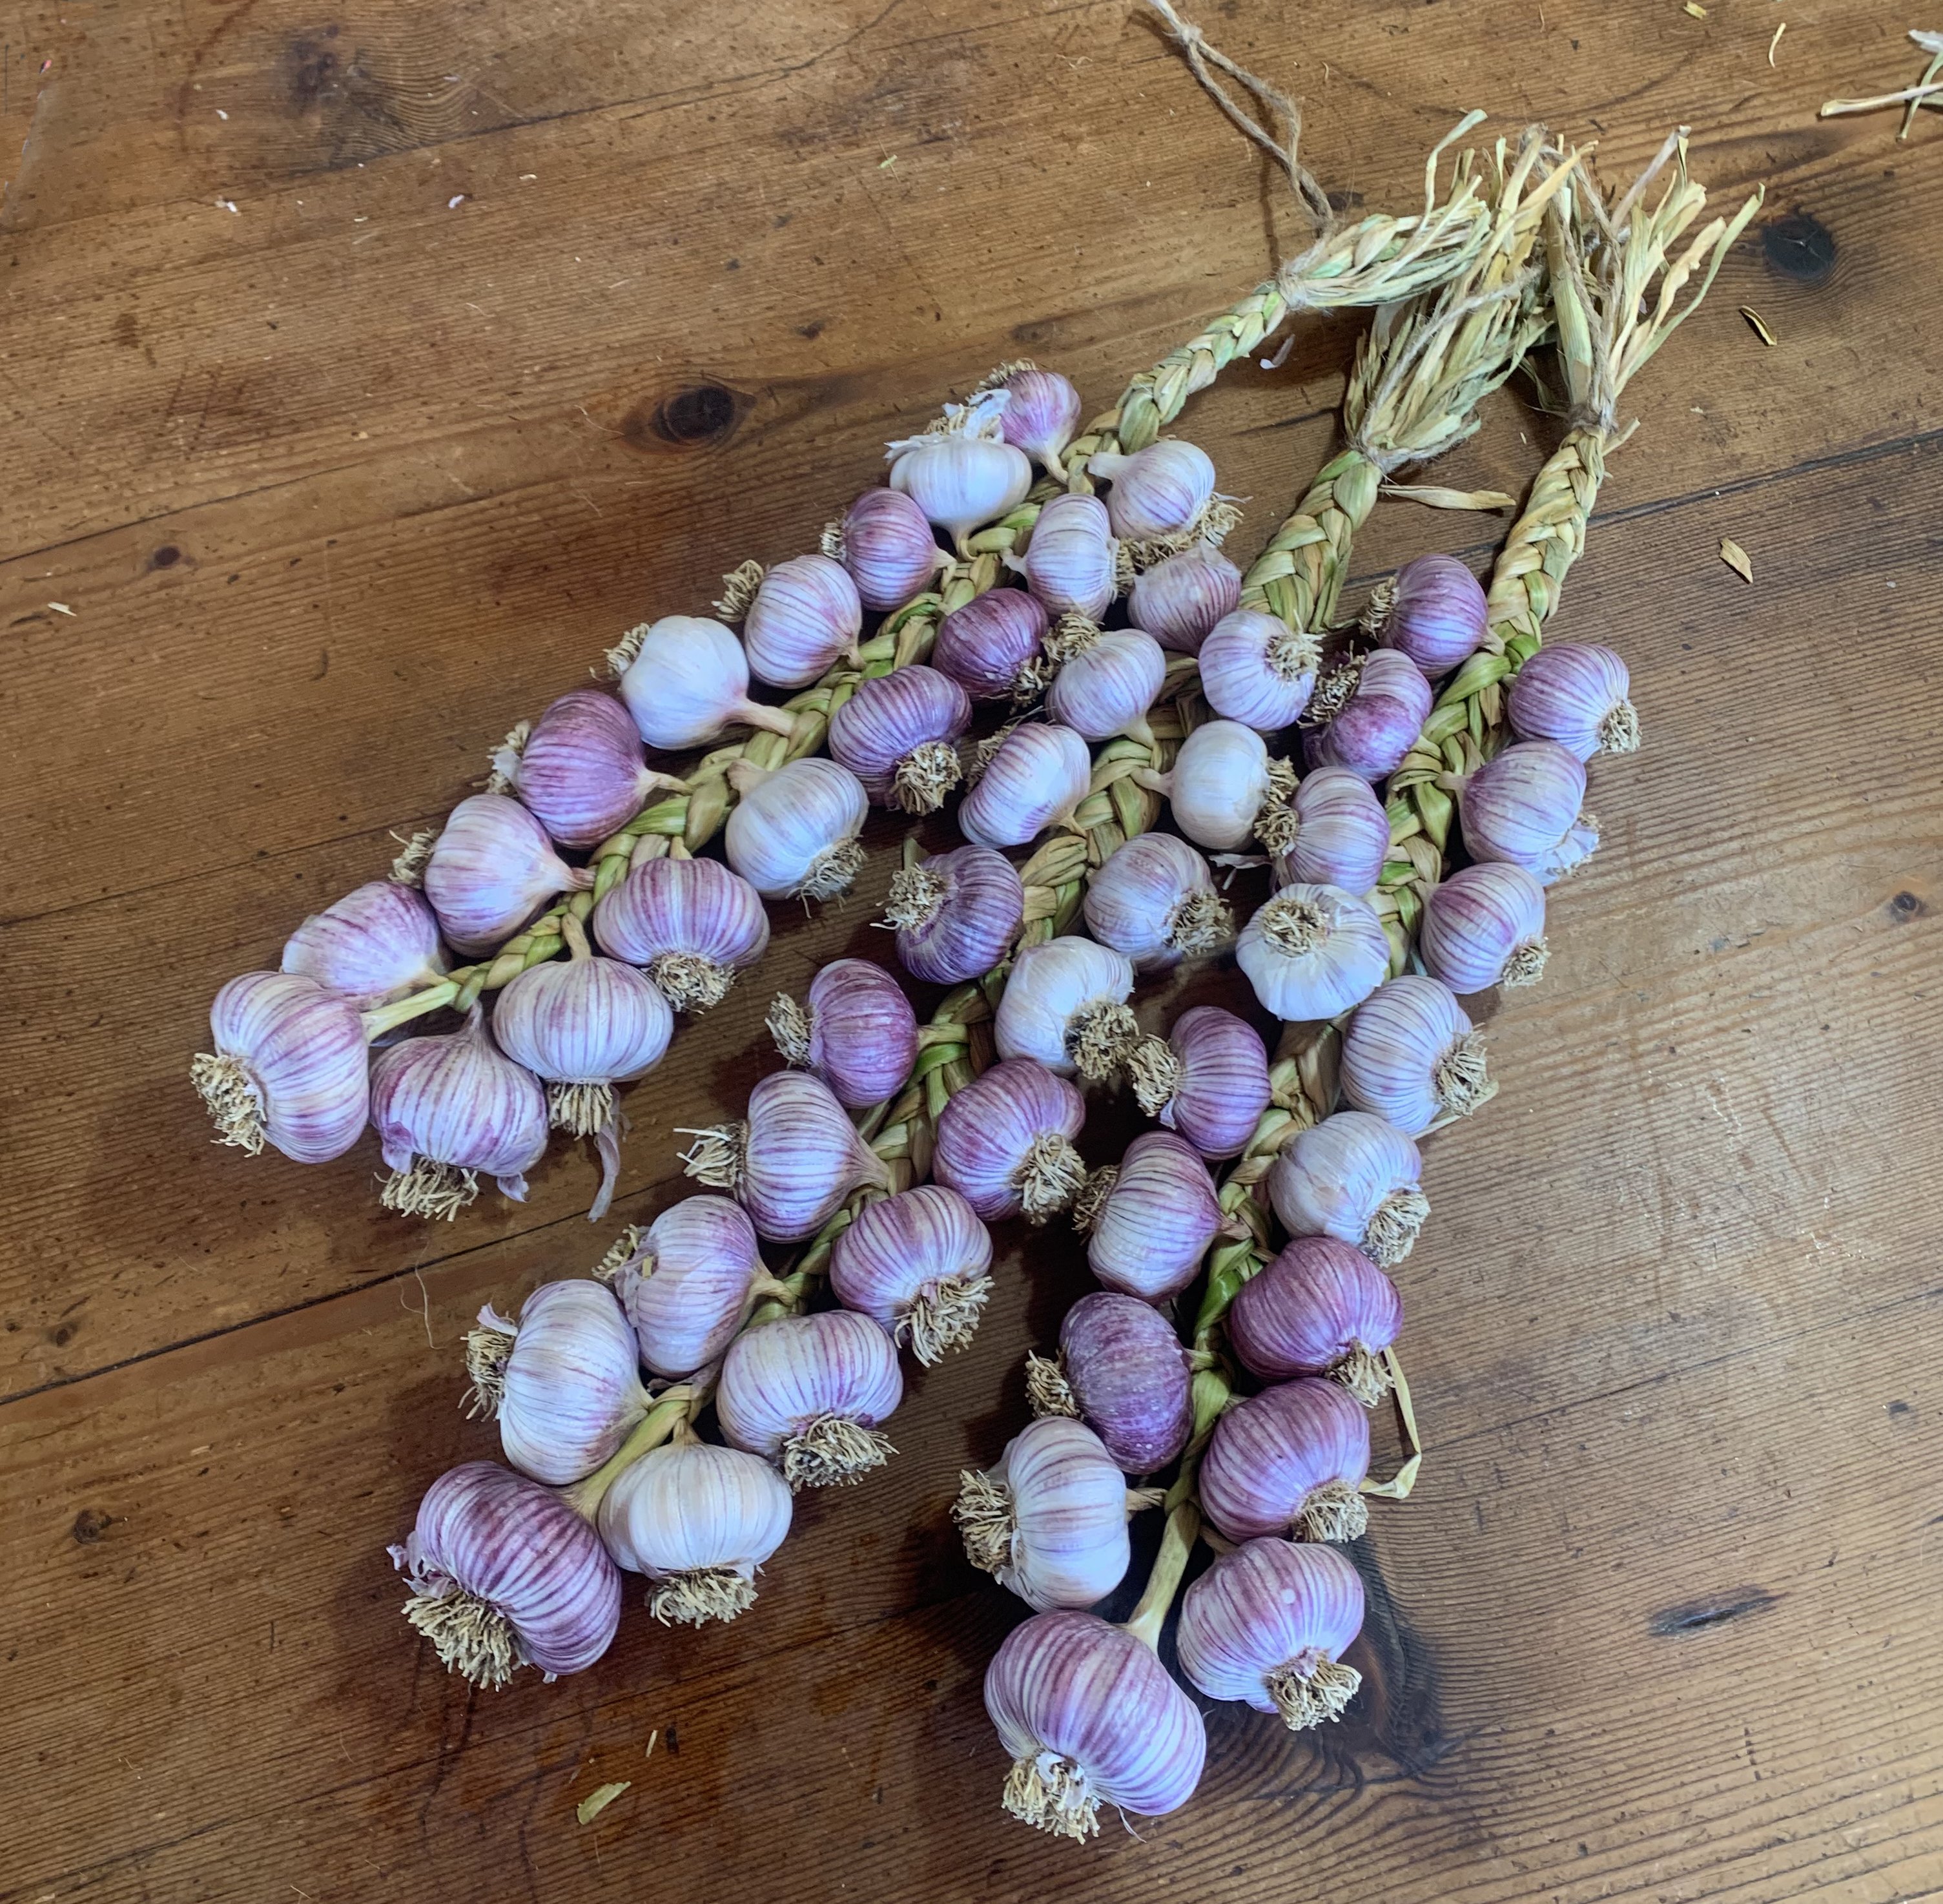 Notes from the Kitchen Garden: Christmas gifts and how to braid garlic